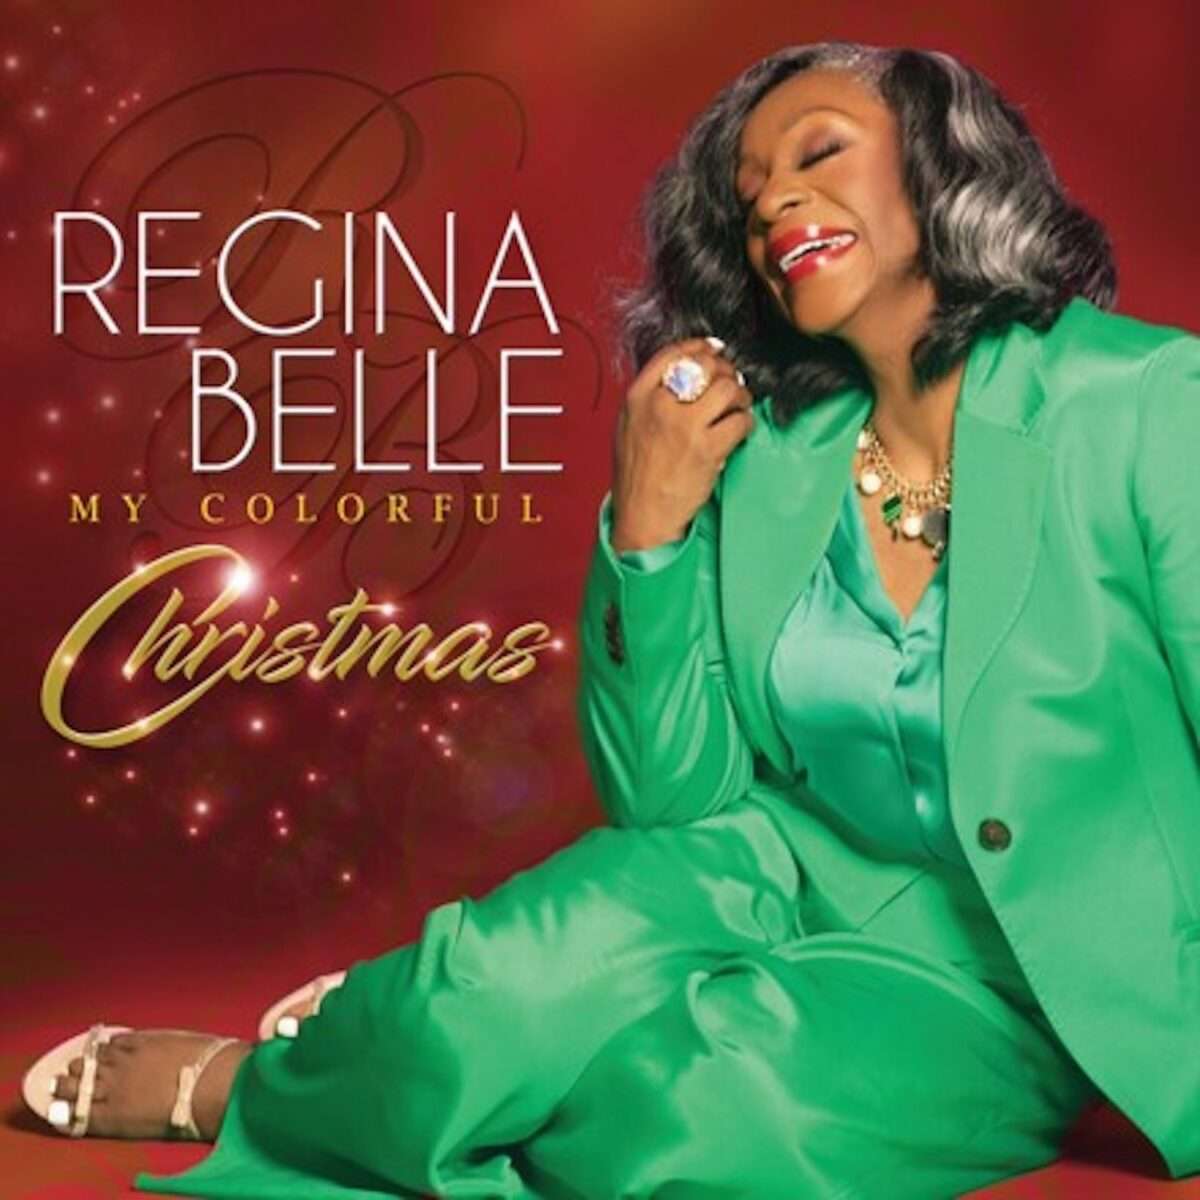 regina-belle,-new-album-my-colorful-christmas-available-for-pre-save/pre-order-now!